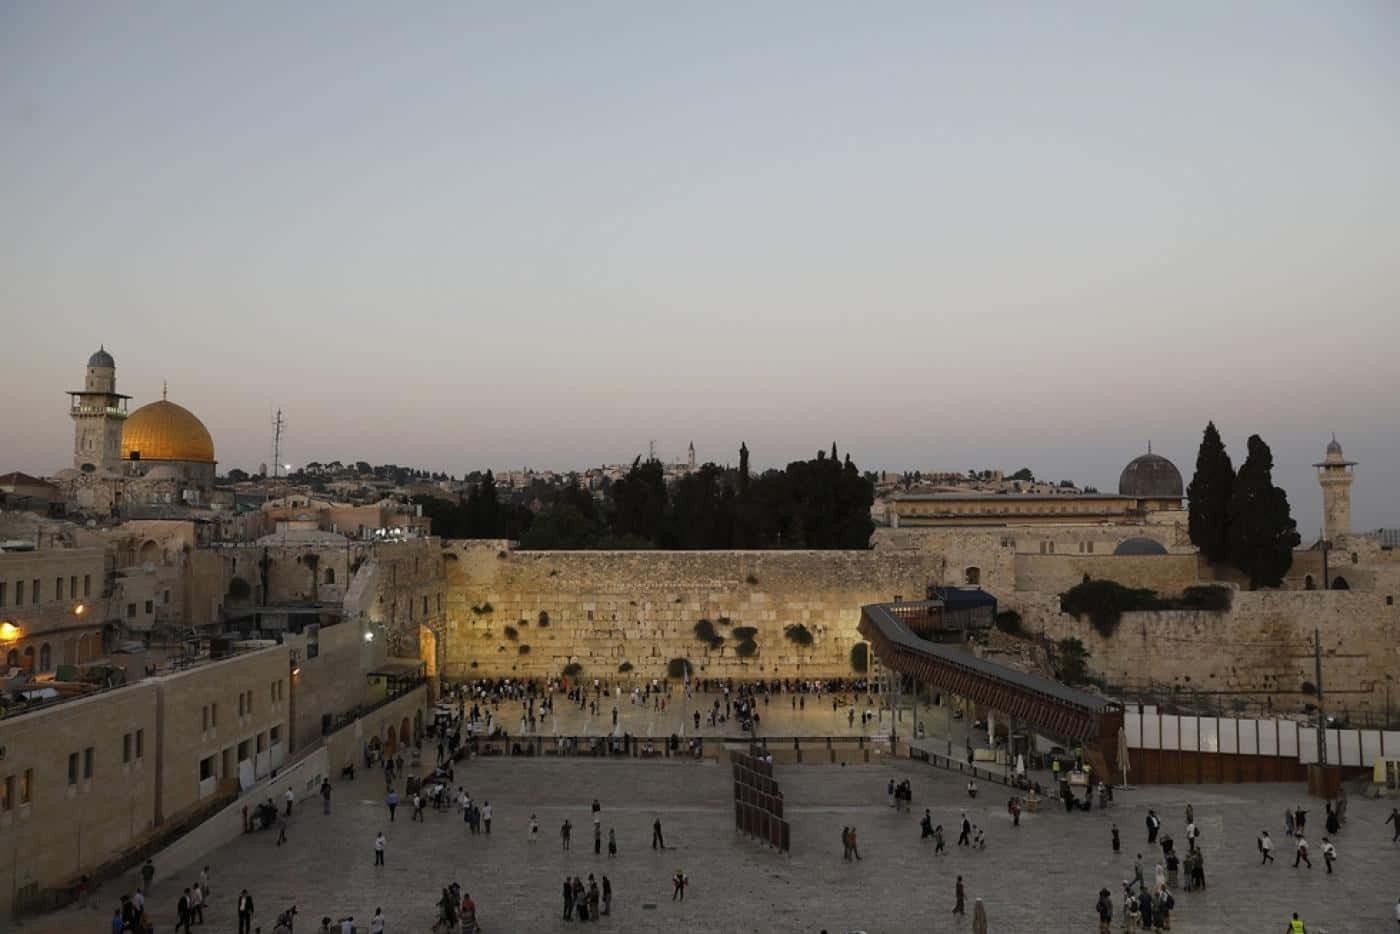 Caption: Captivating Image of the Wailing Wall in Jerusalem Wallpaper